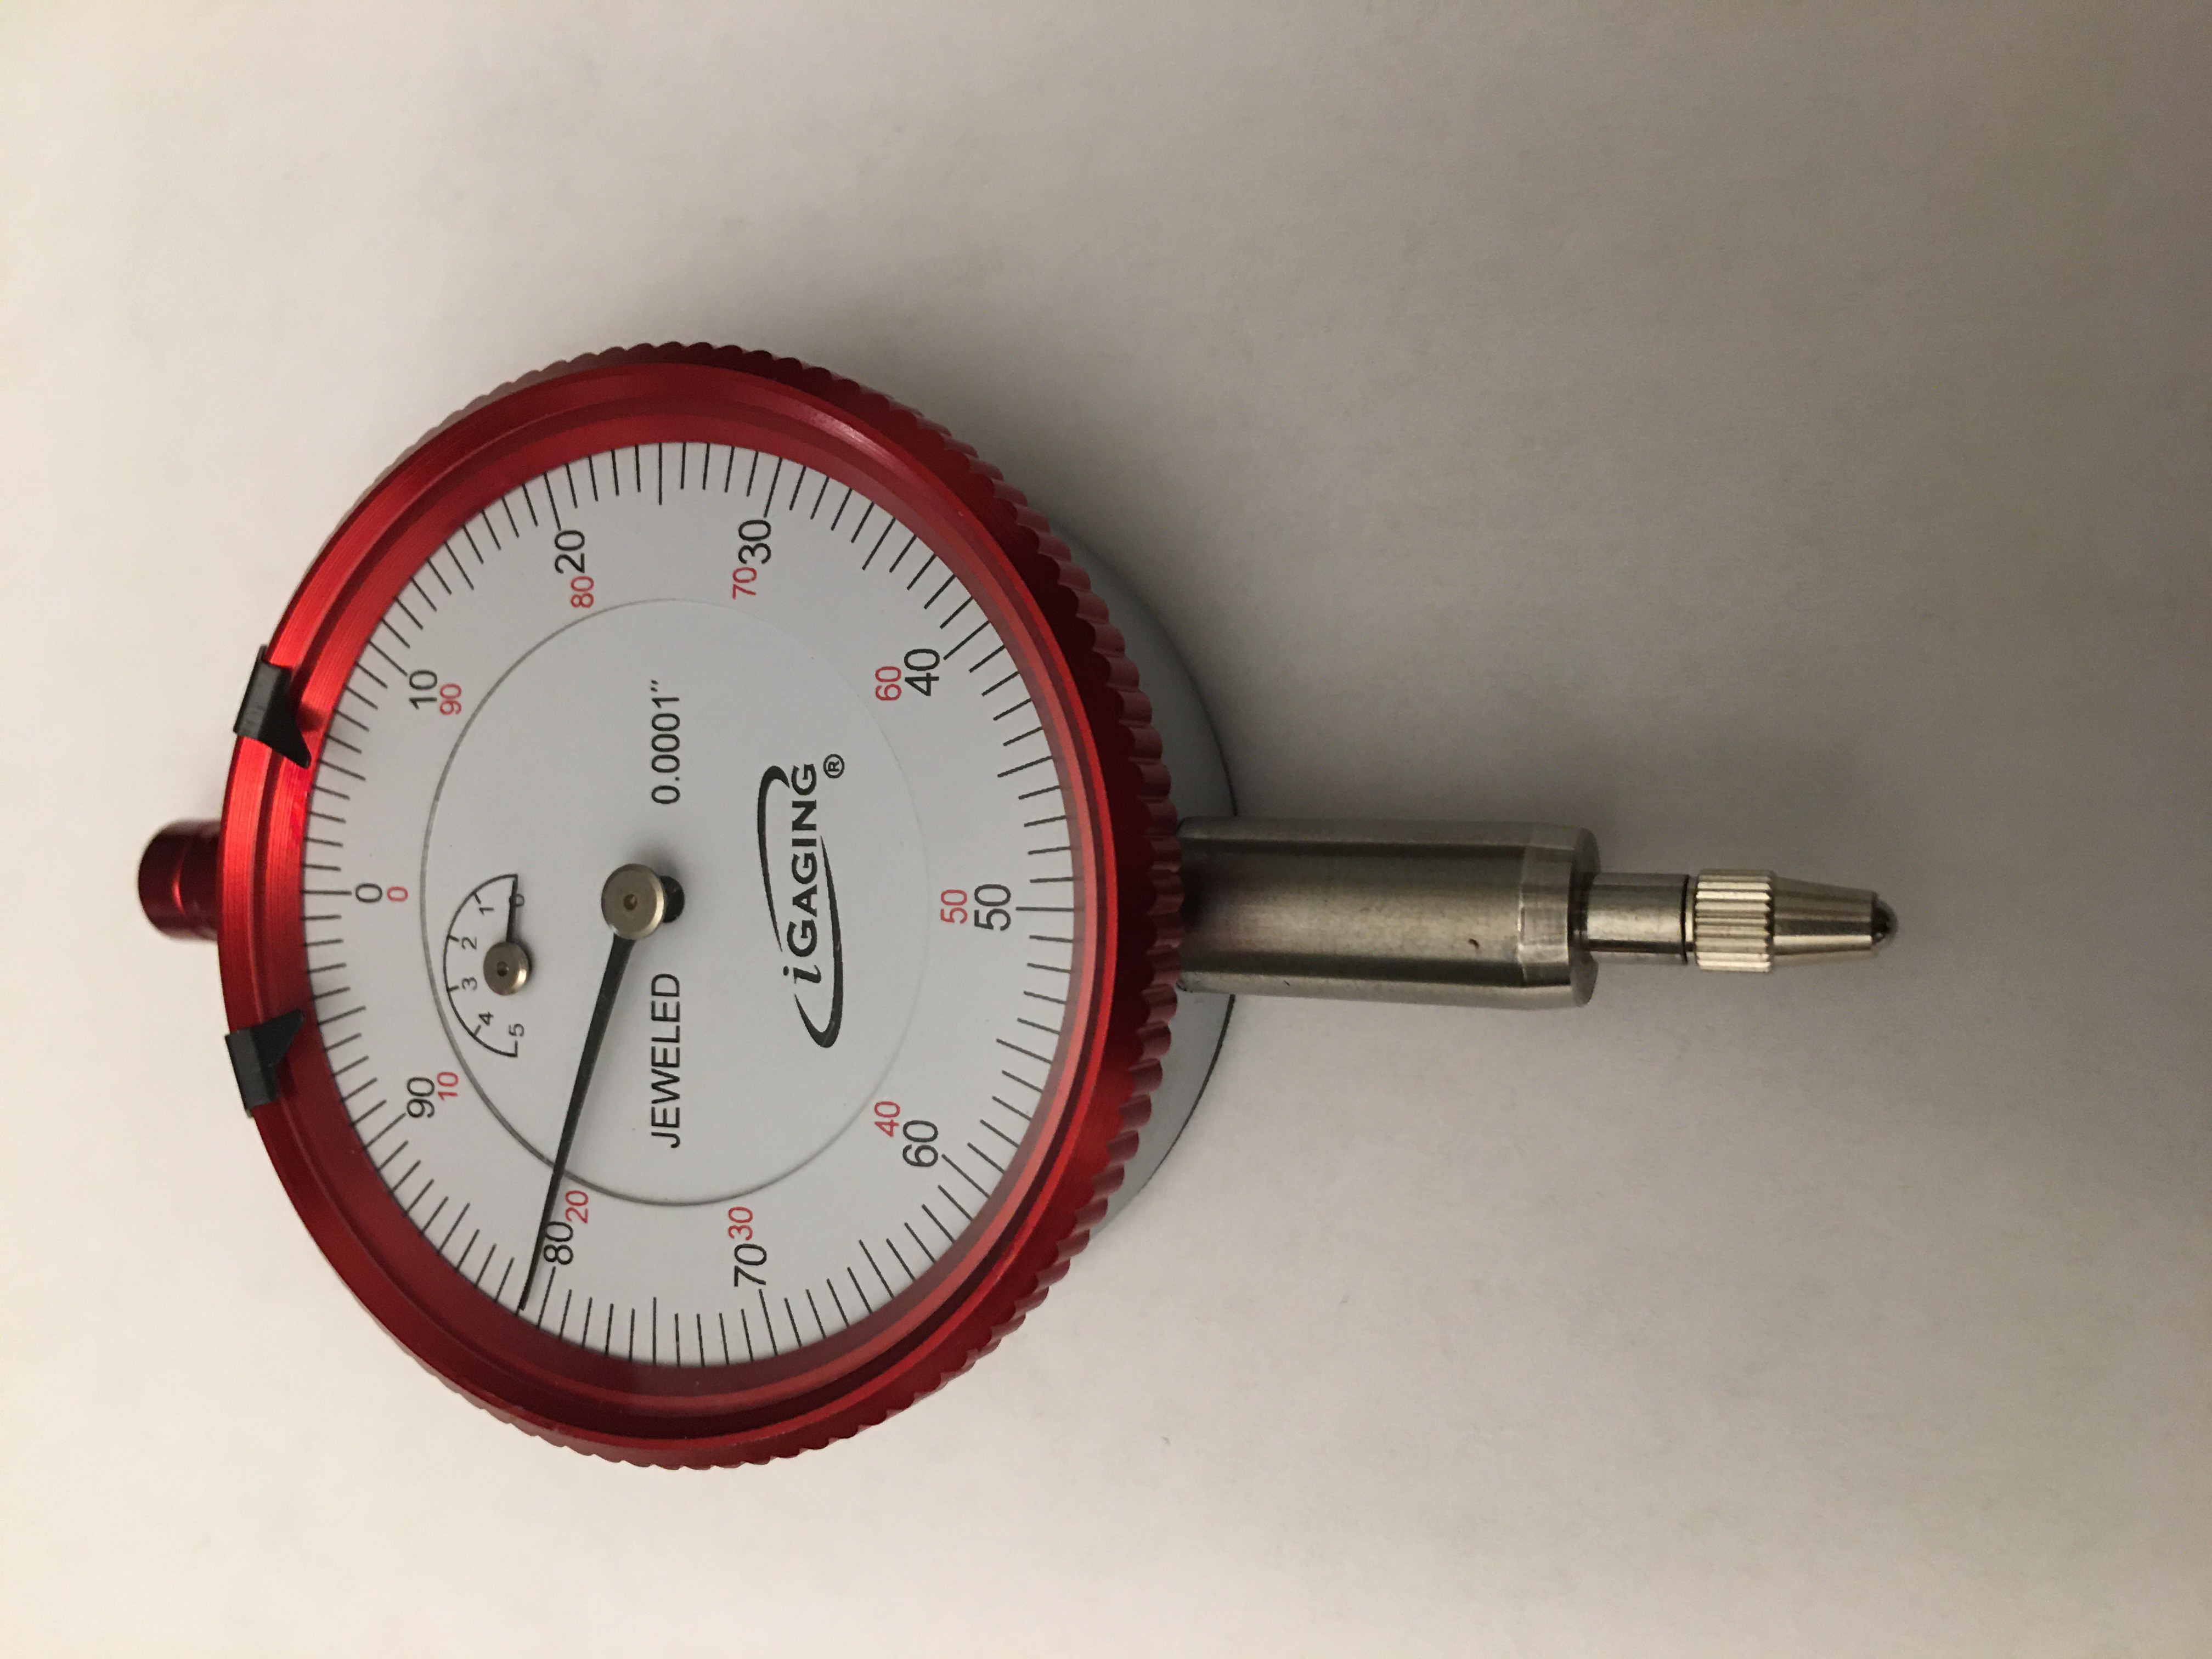 High end Jeweled Dial Indicator with .05" range and 0.0001" Accuracy